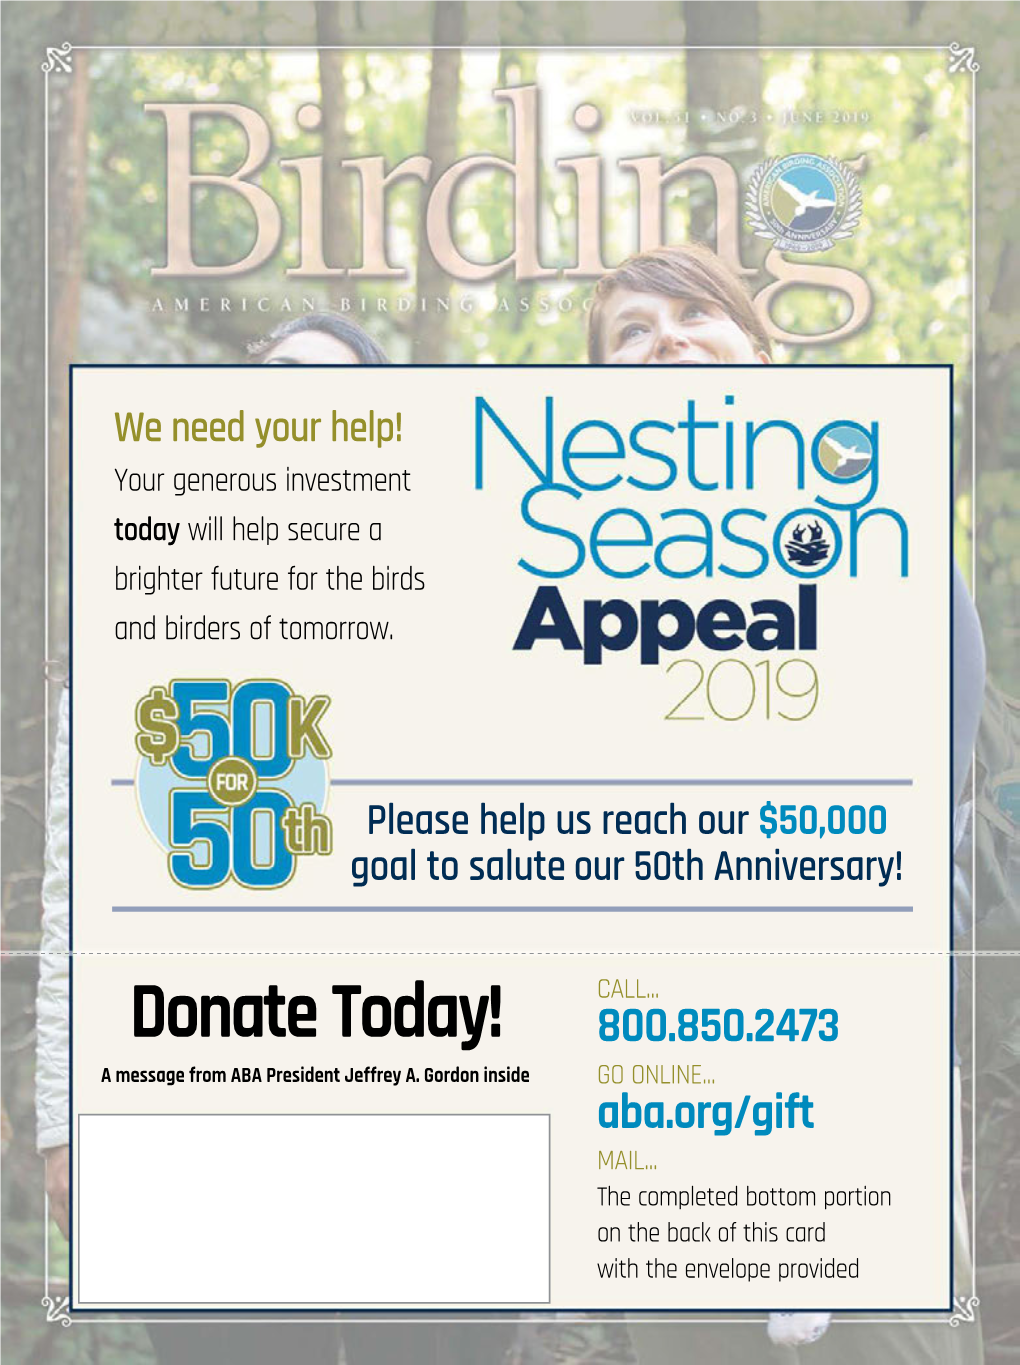 Donate Today! 800.850.2473 a Message from ABA President Jeffrey A